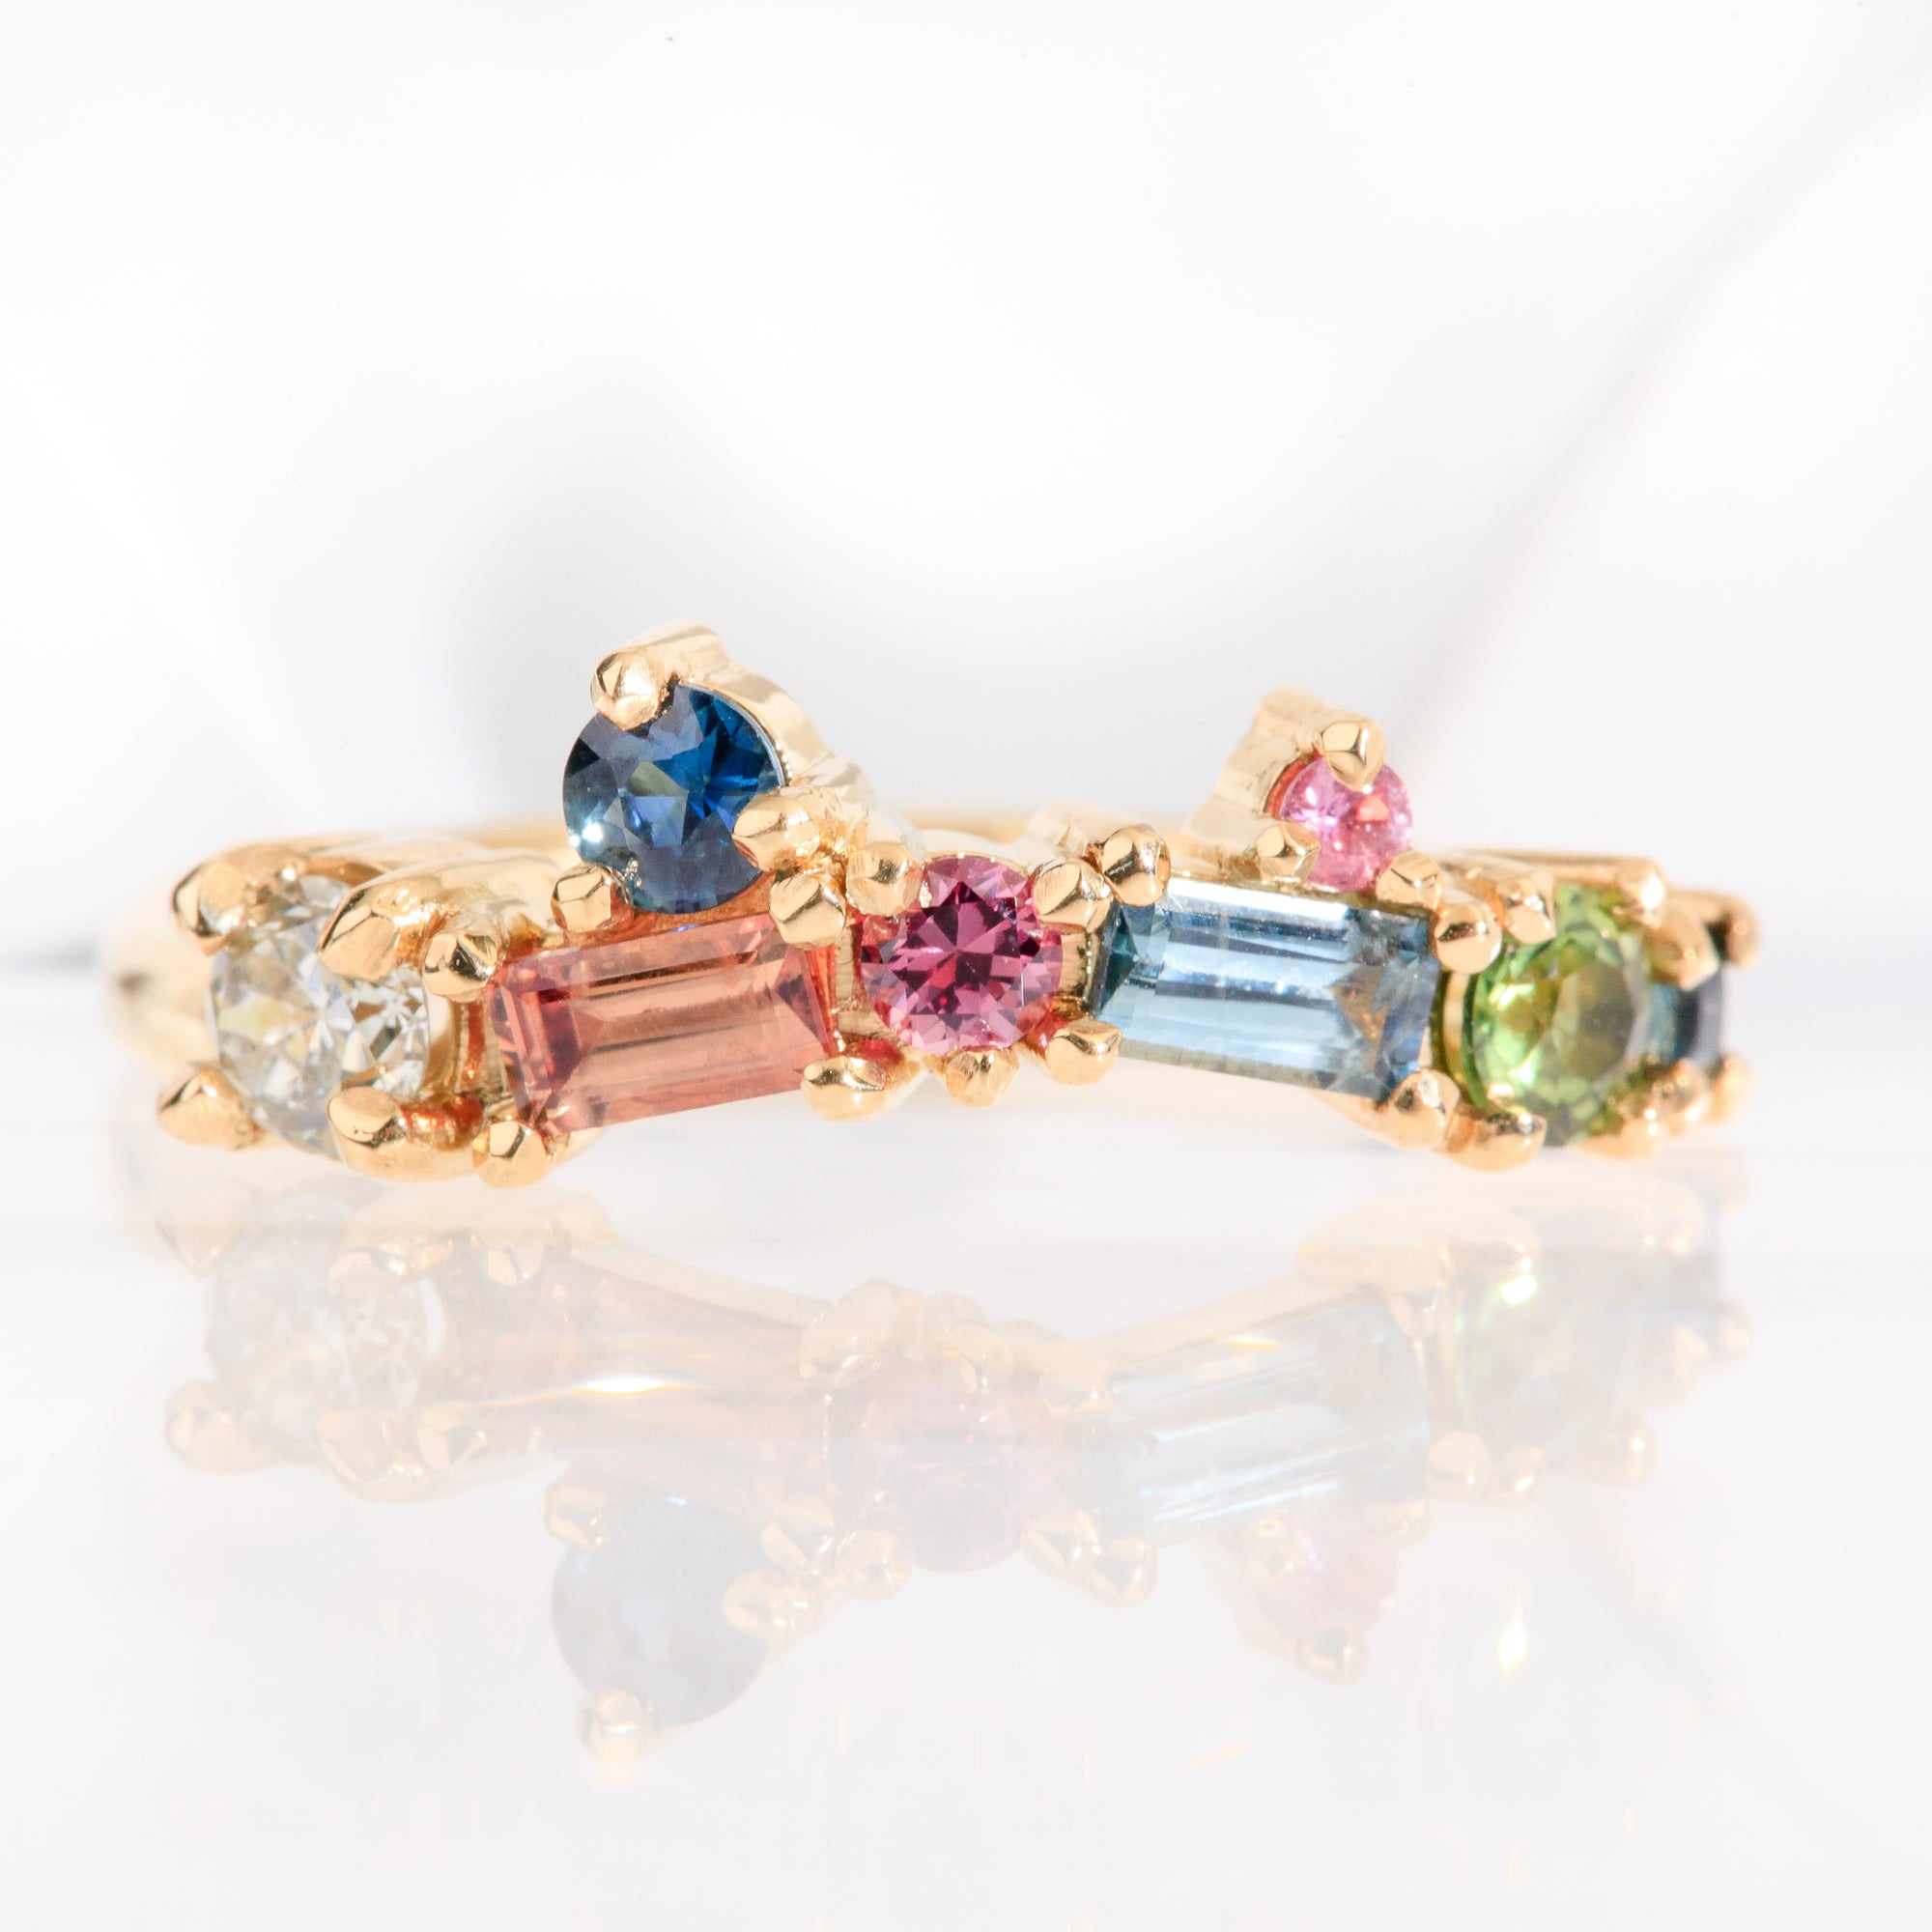 Colourful, ethically sourced Australian sapphires and diamond wedding band in 18ct yellow gold. Handcrafted in Melbourne.Colourful ethically sourced Australian sapphires and diamond wedding band in 18ct yellow gold. Handcrafted in Melbourne.